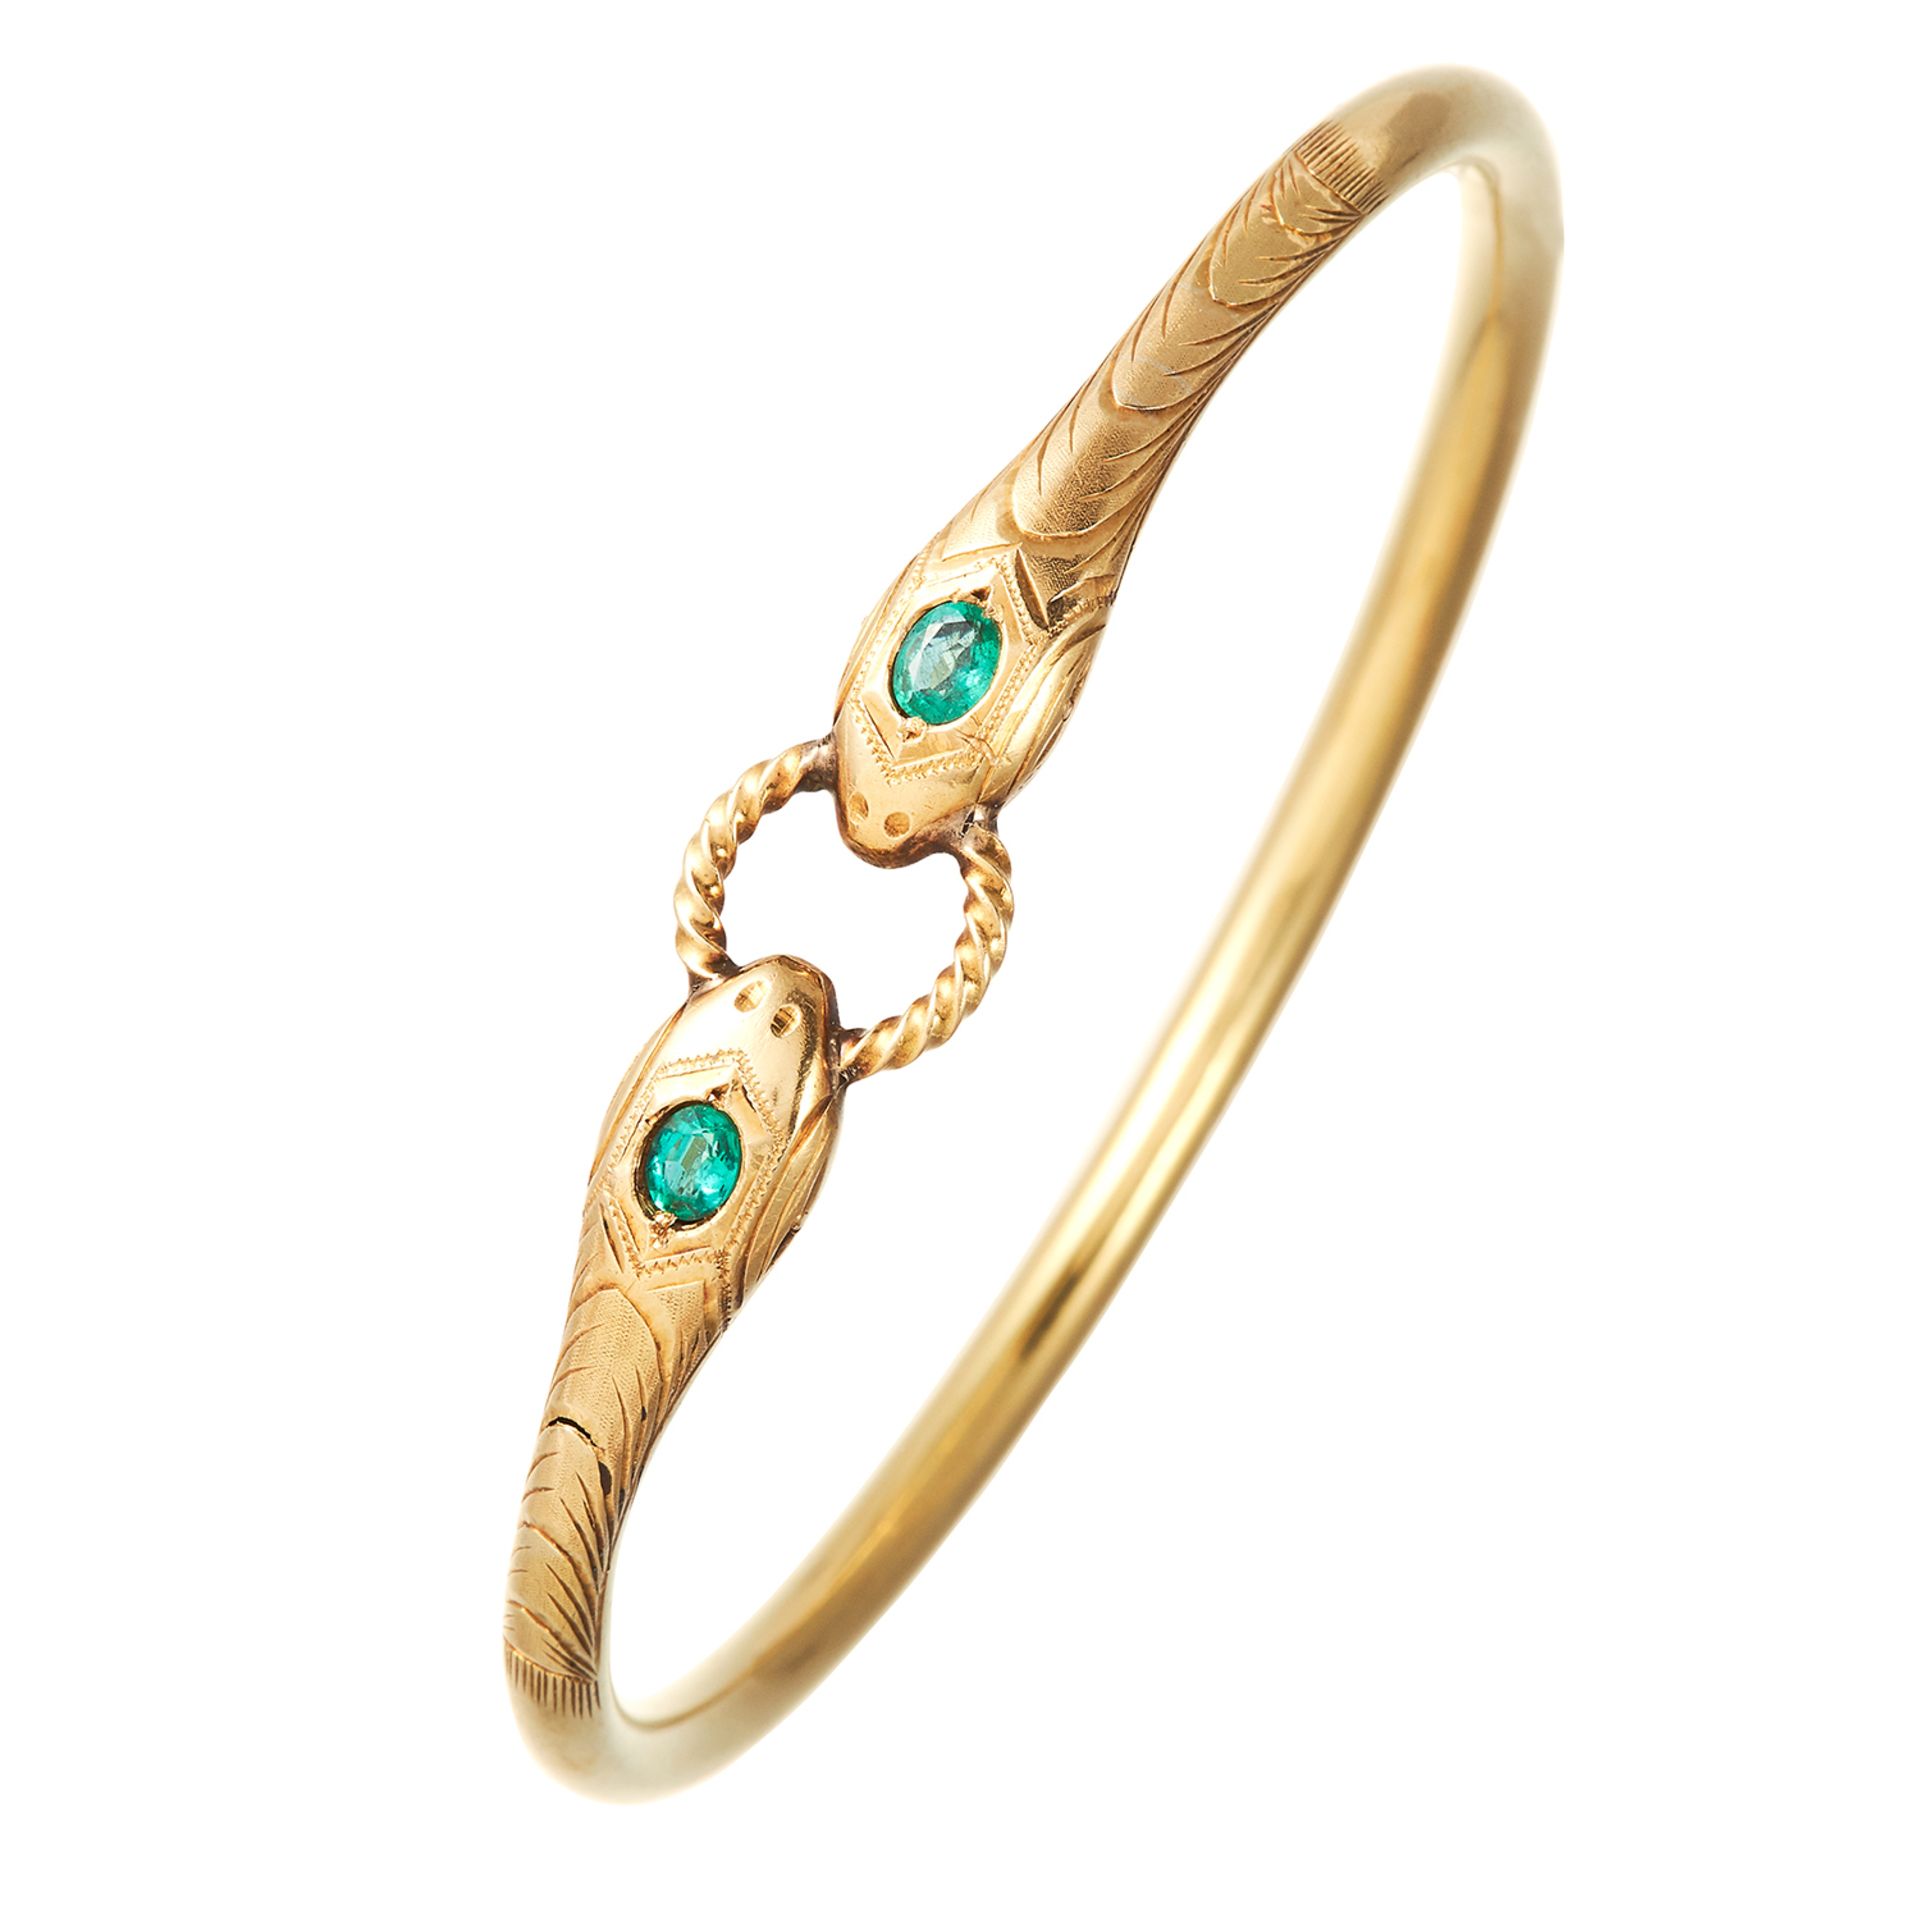 AN ANTIQUE EMERALD SNAKE BANGLE, 19TH CENTURY in high carat yellow gold, the snakes' heads